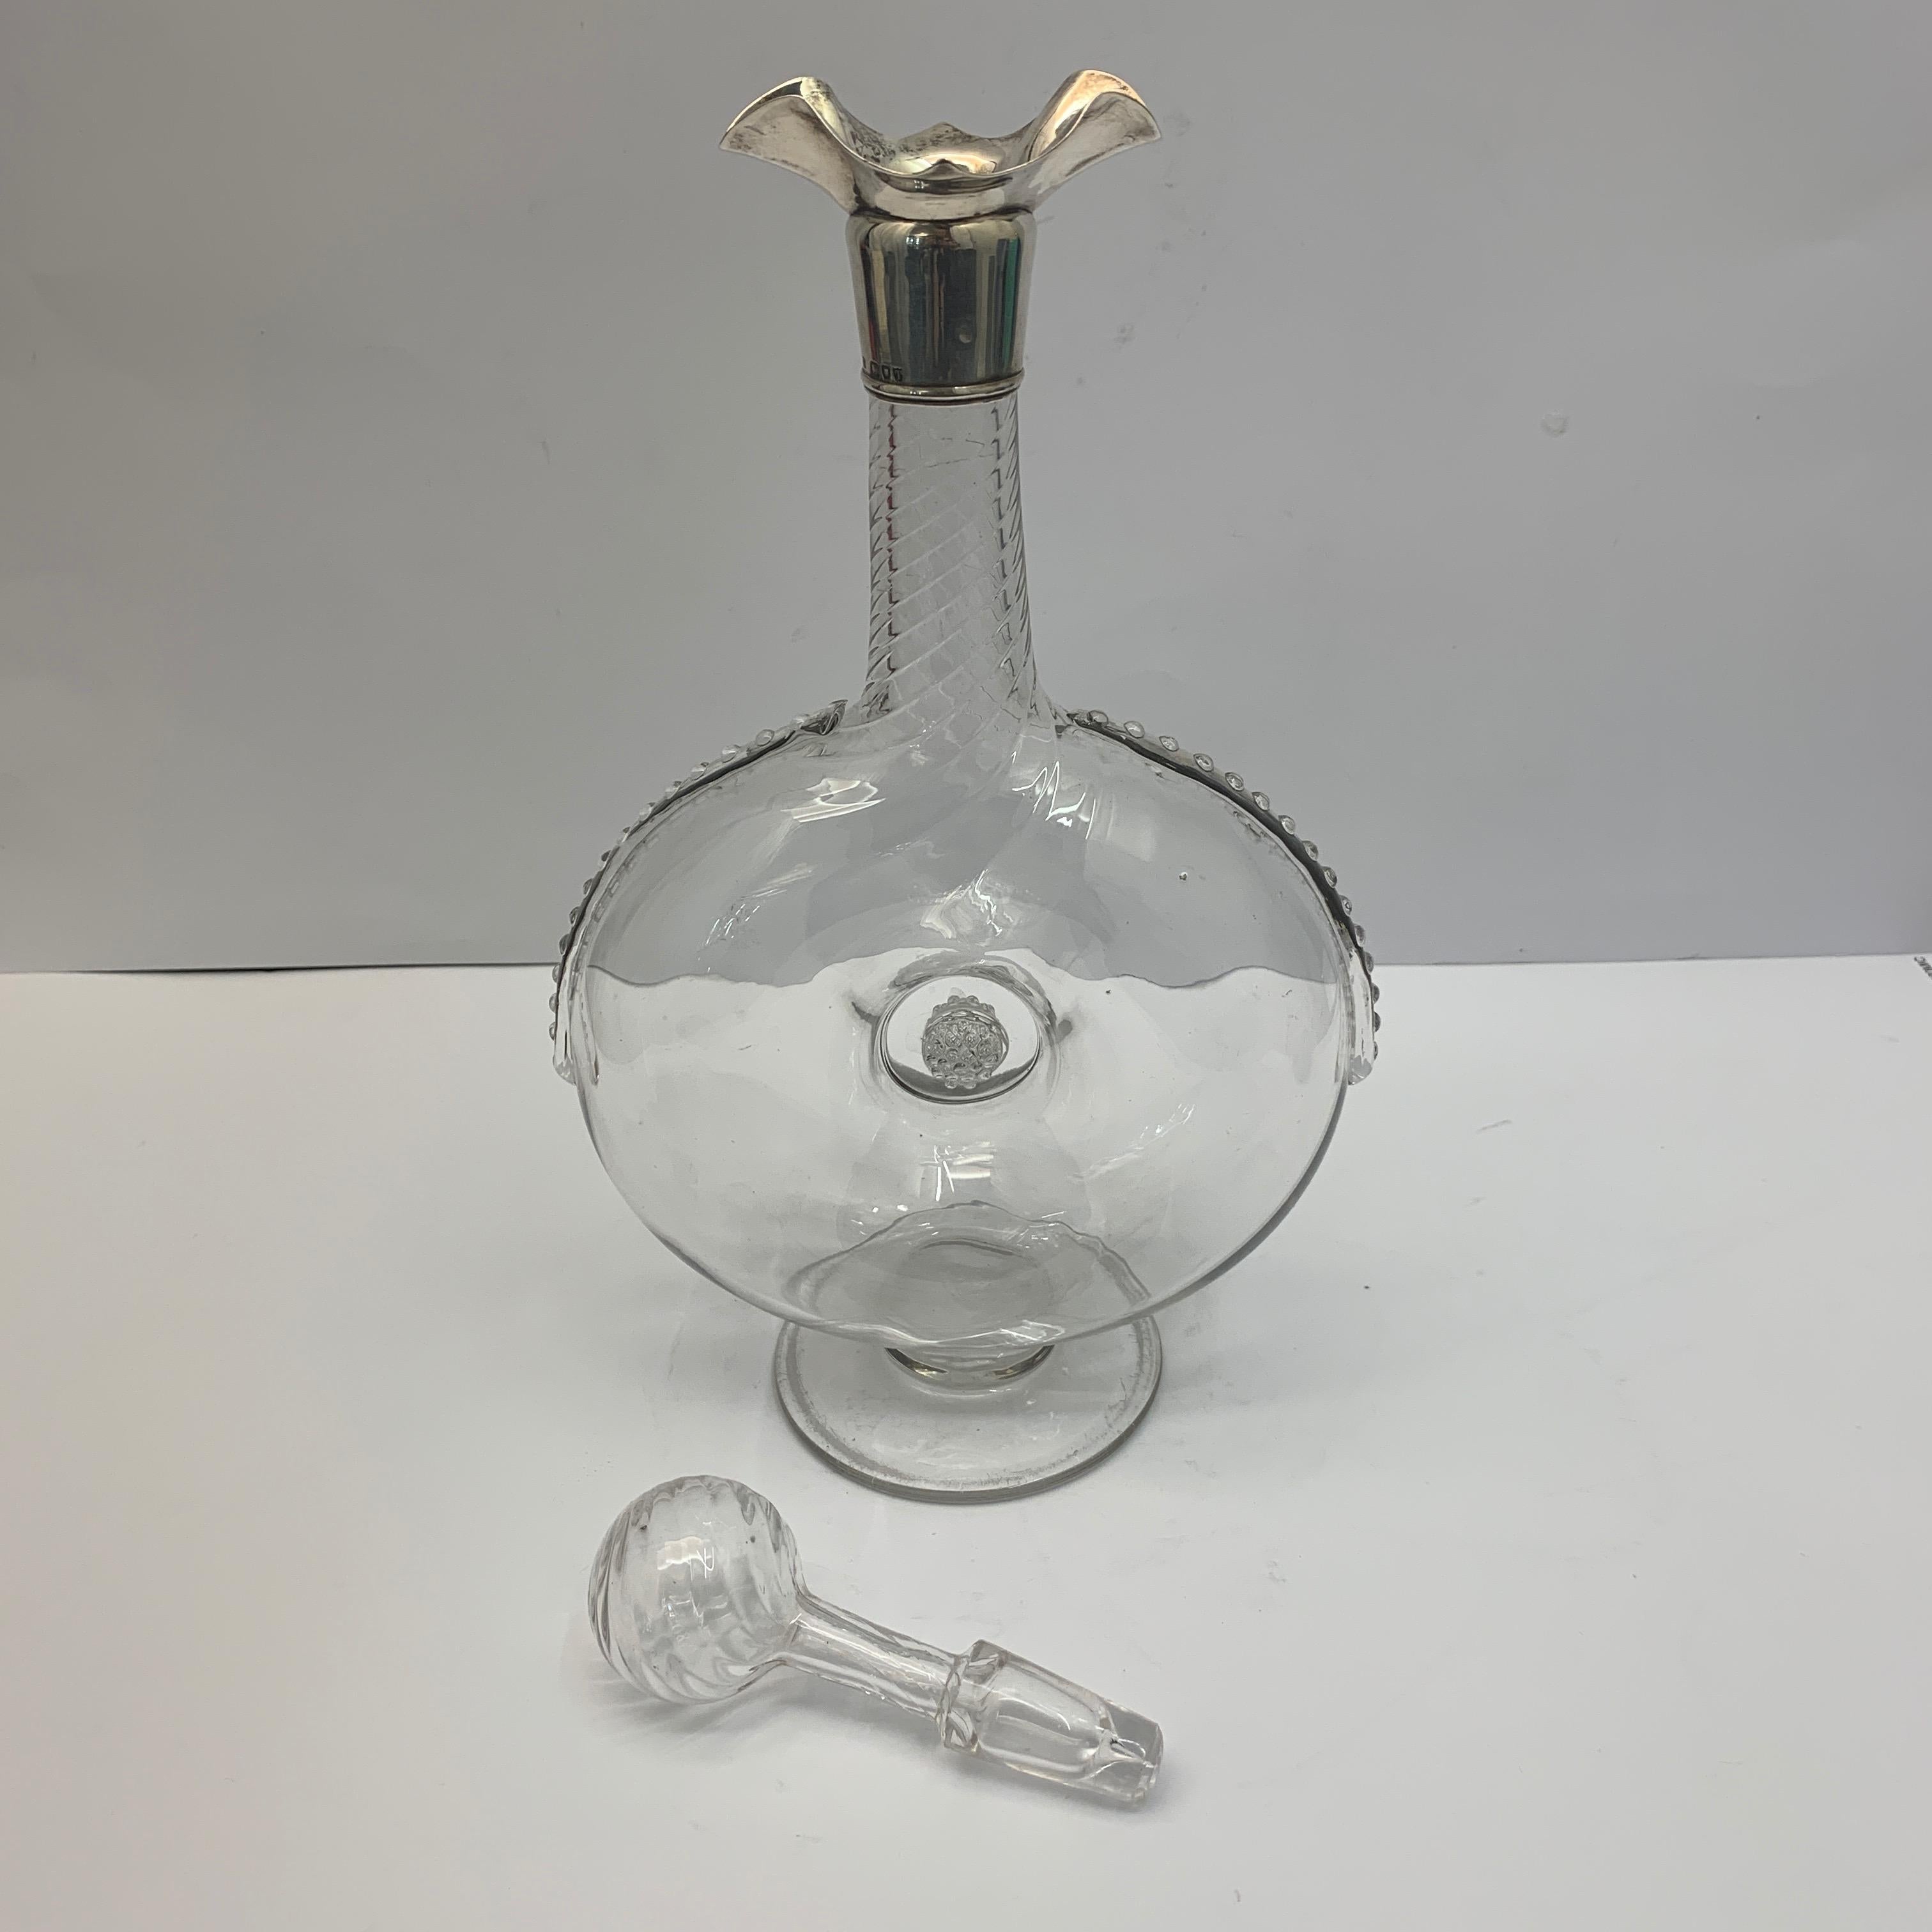 A glass wine decanter with delicate decoration and fully hallmarked, fluted silver rim pourer, finished with a spherical glass stopper. London, 1894. 

(Measurements shown are height including stopper).